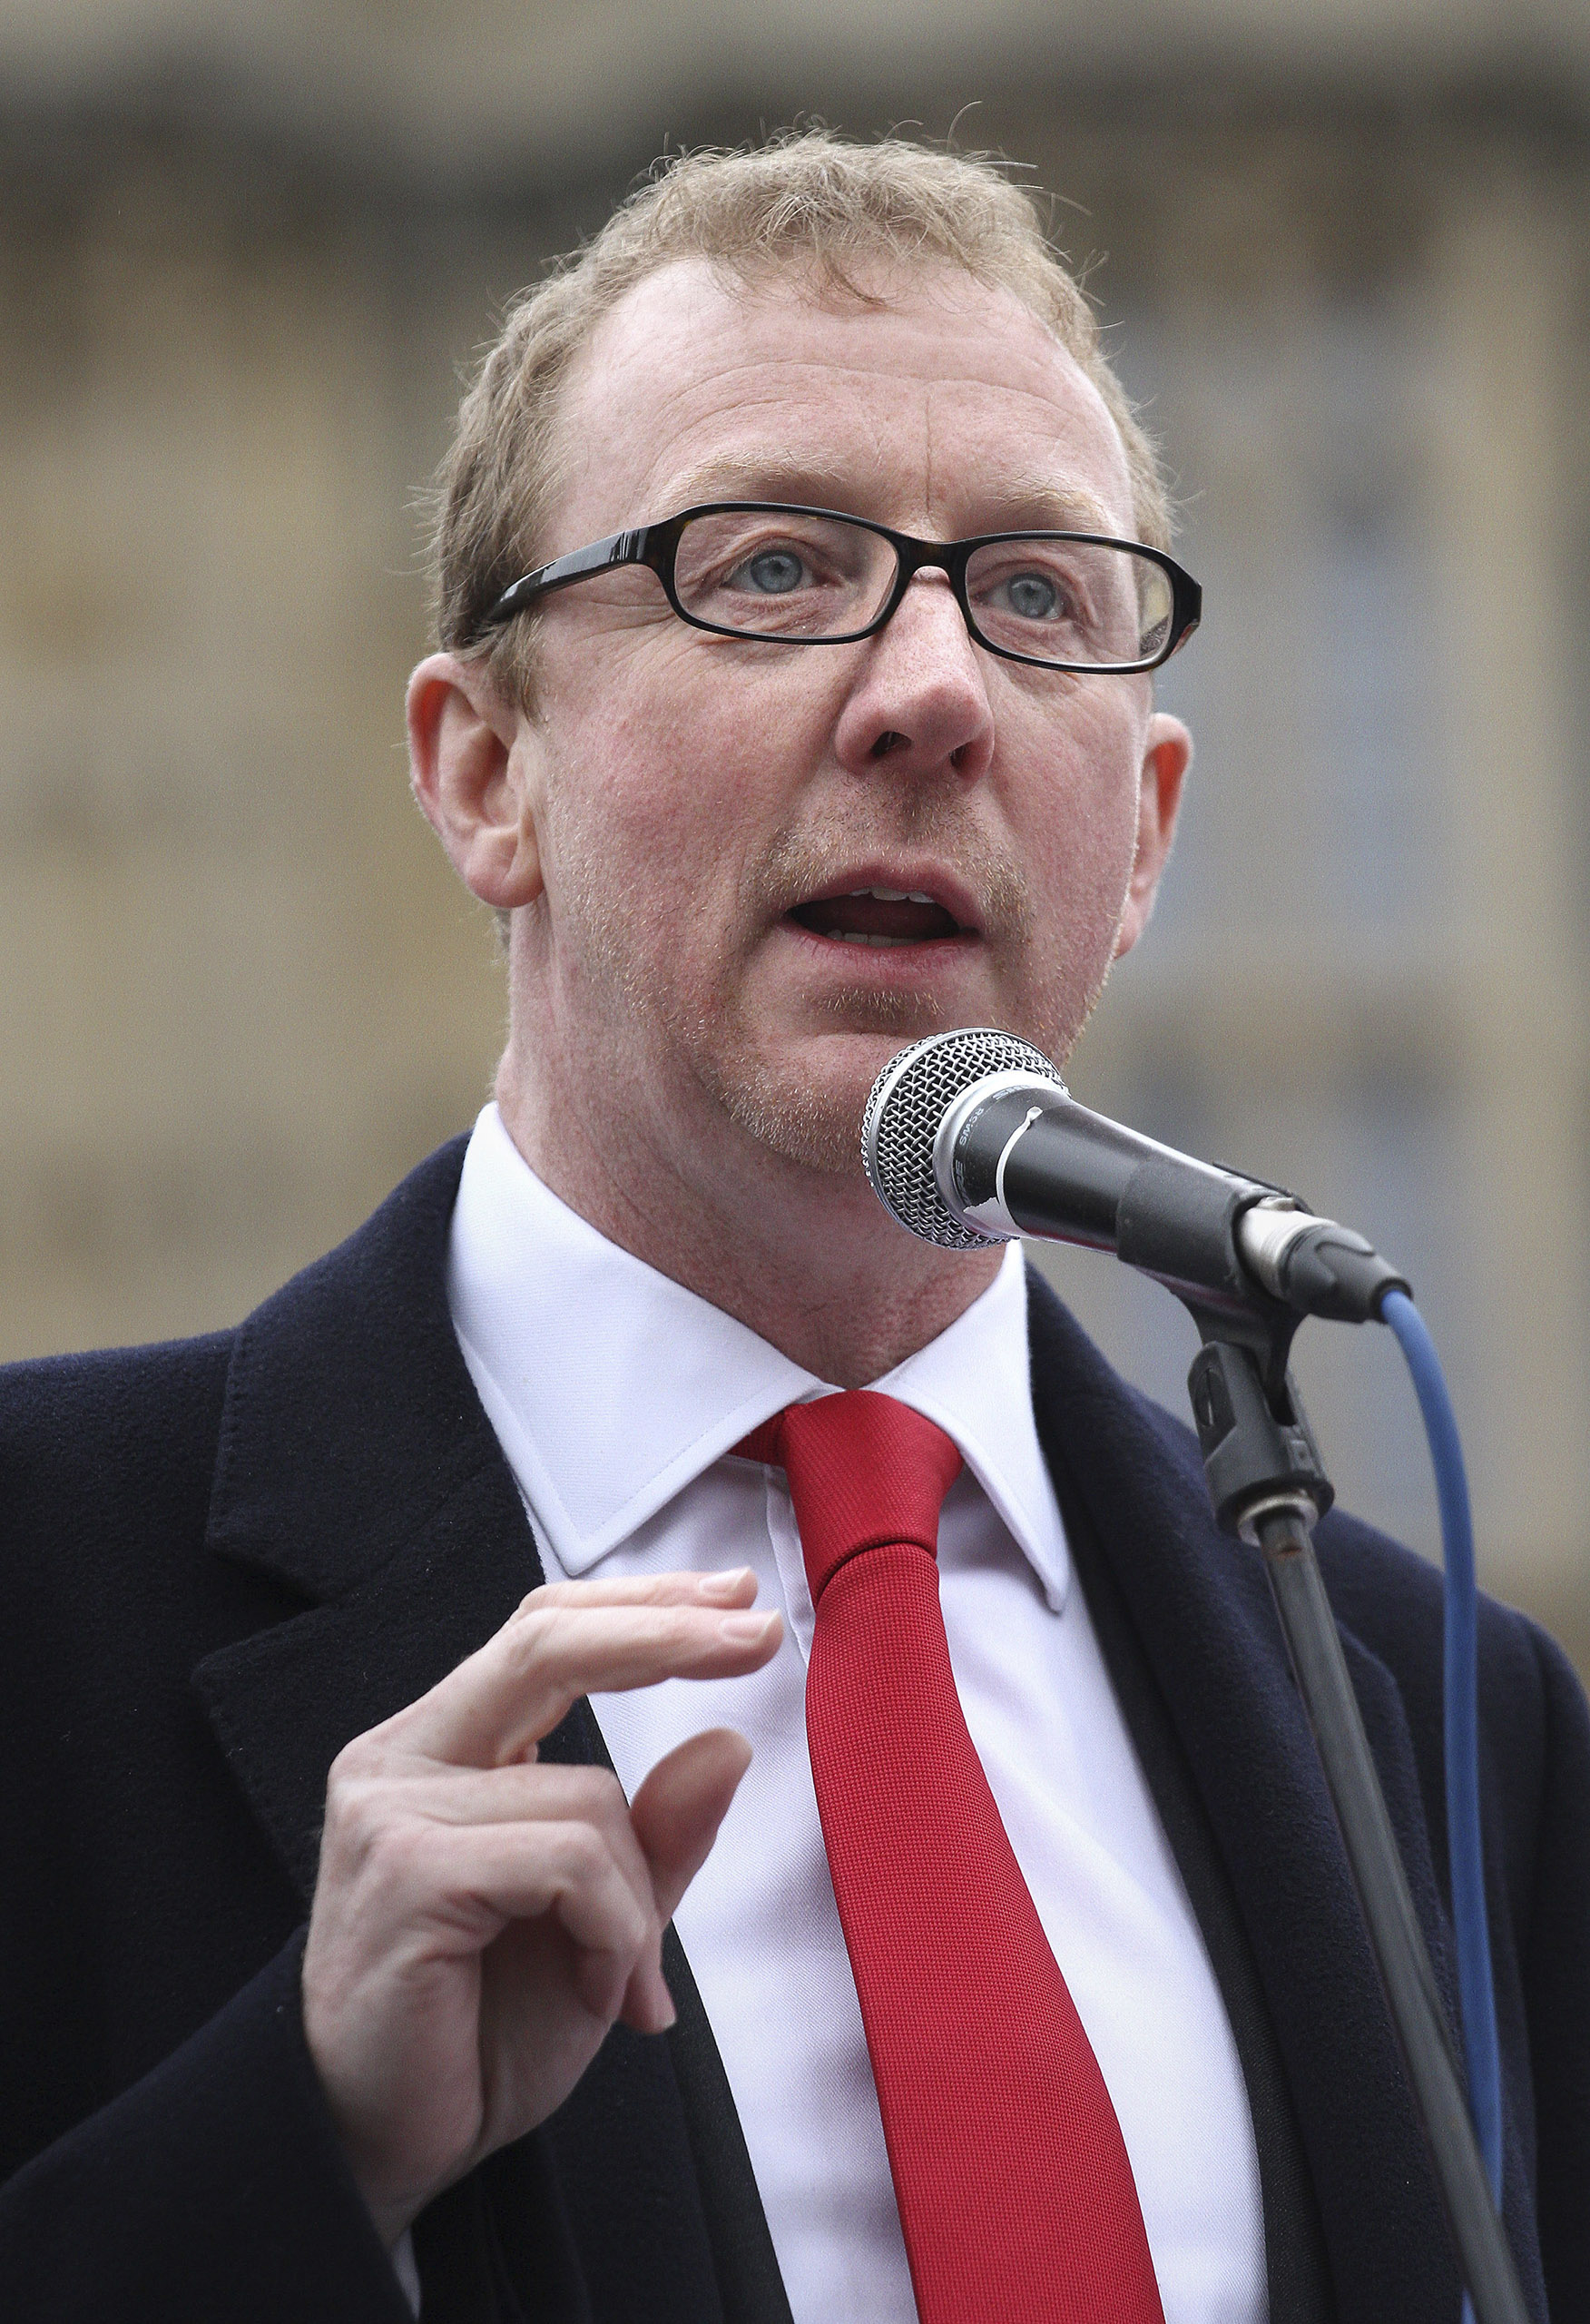 Dave Rowntree, the drummer from the band Blur, speaks outside the Houses of Parliament in London, May 22, 2013. (Philip Toscano—PA Wire/AP)